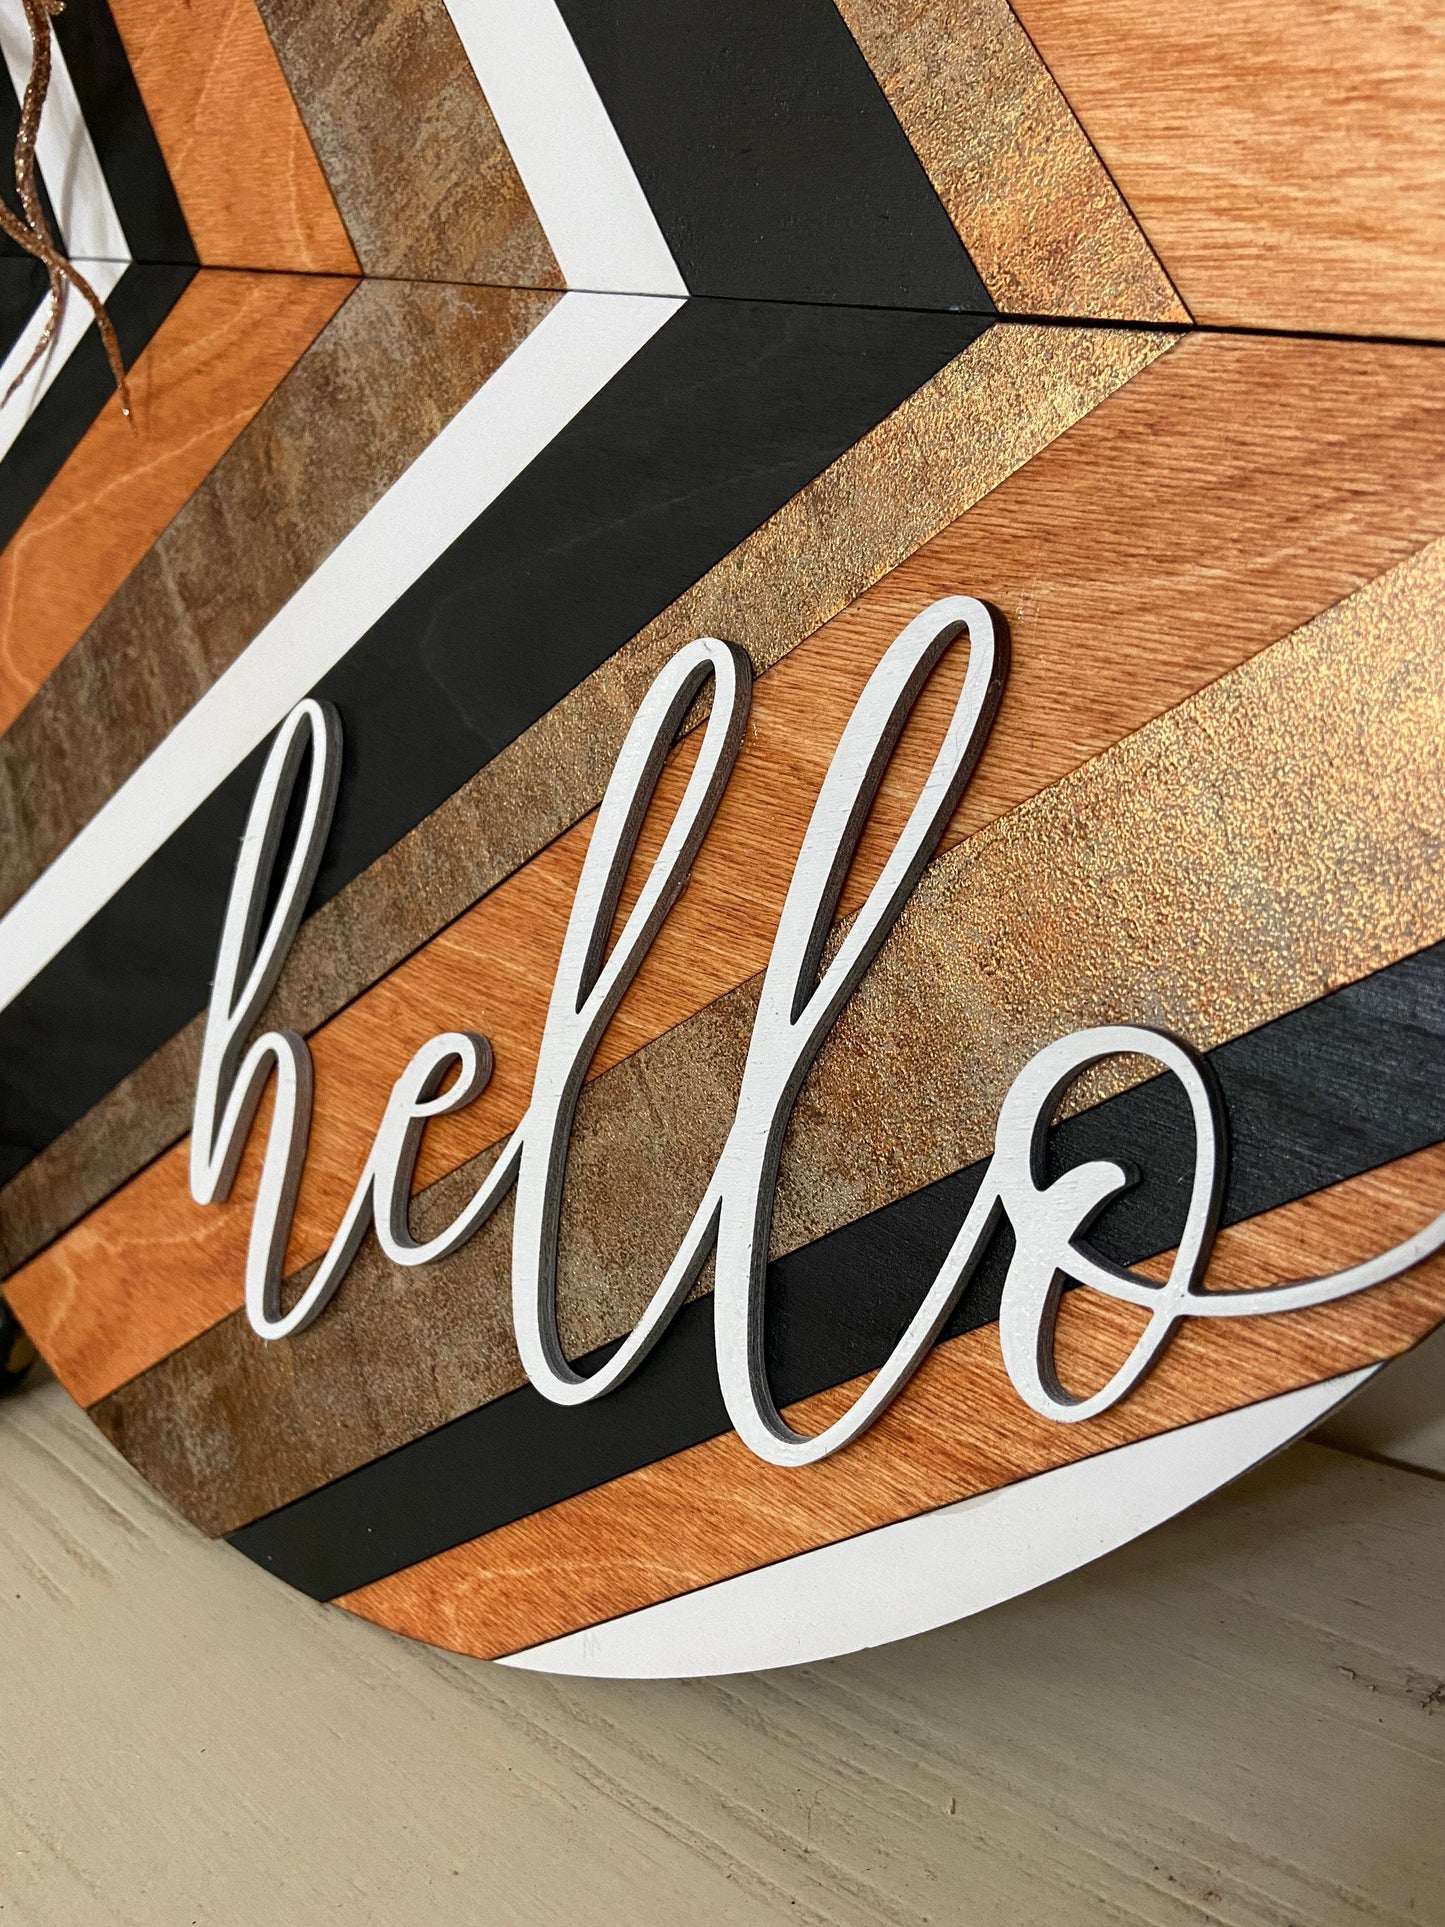 The Jess - Hello Wood Sign